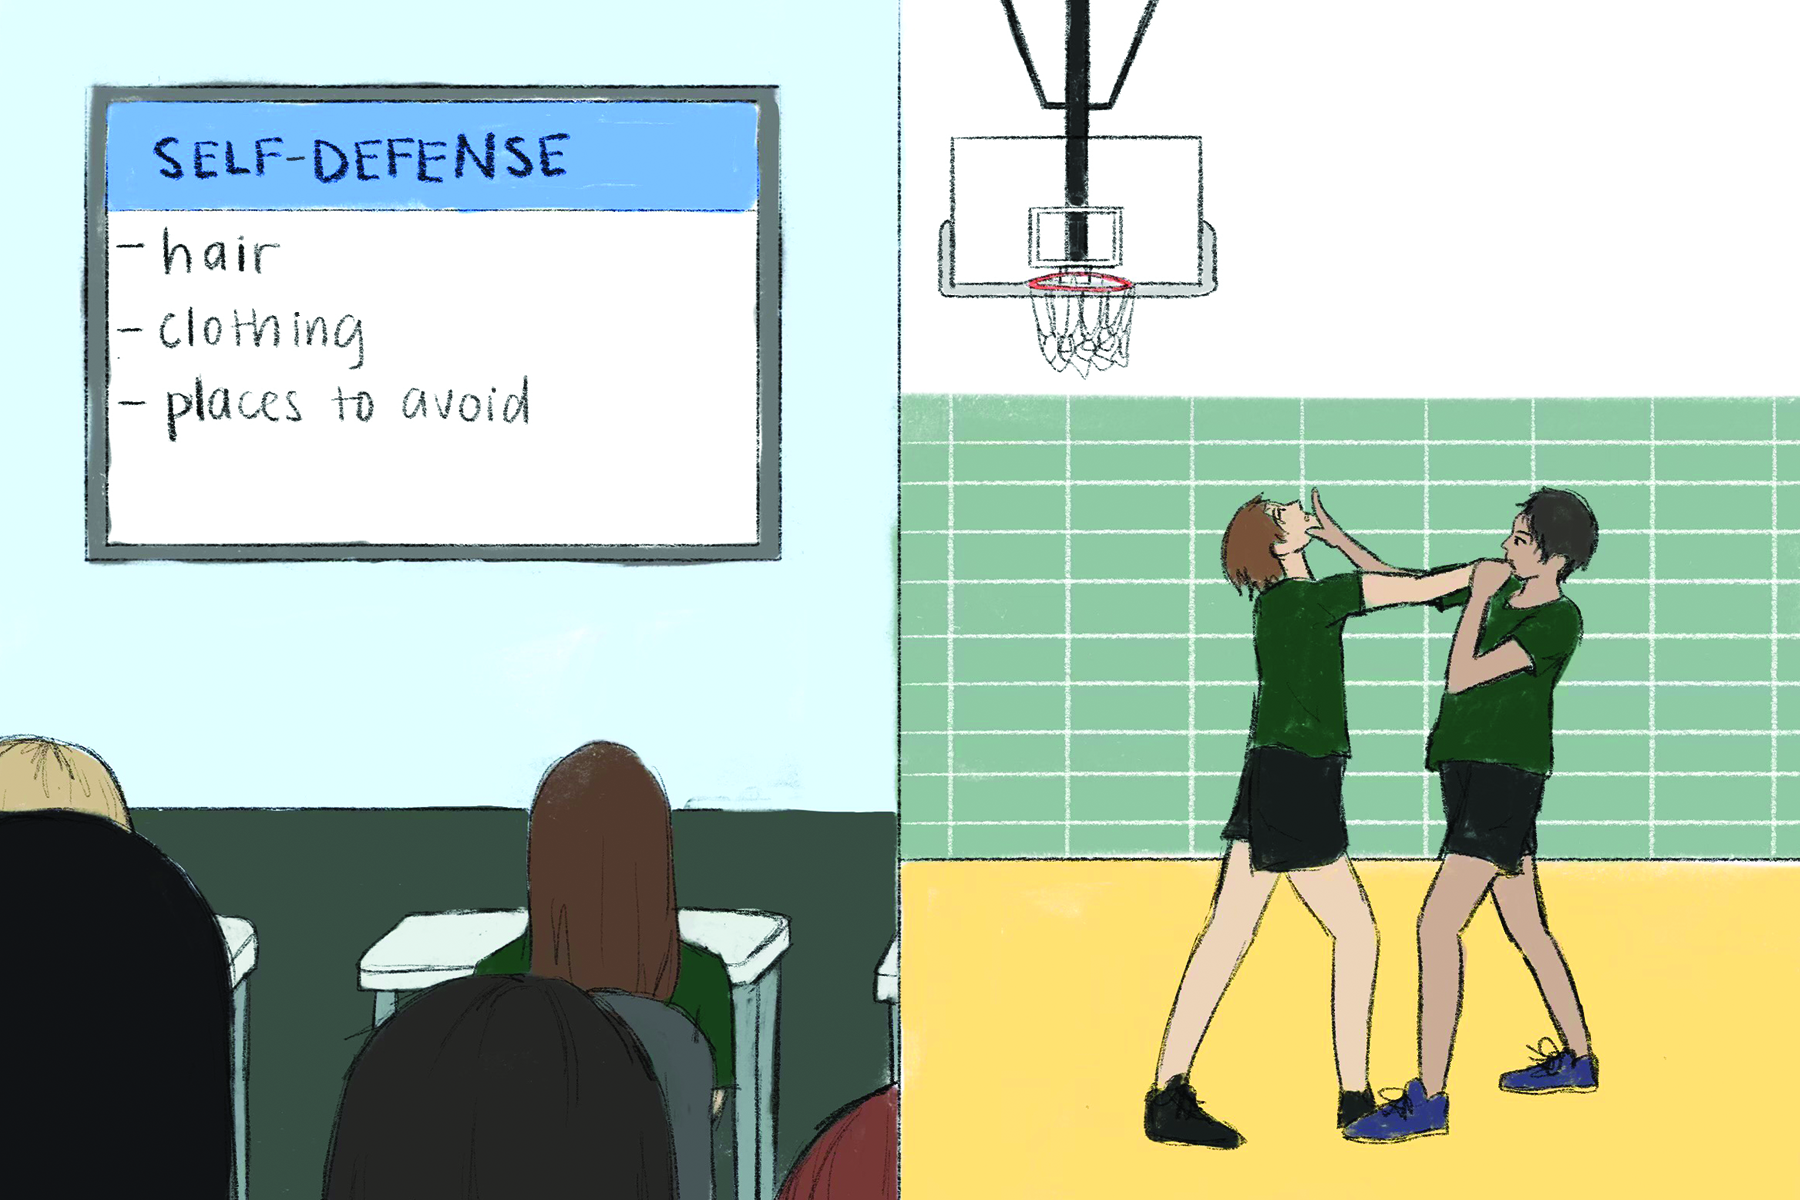 The P.E. self-defense curriculum is the same for both boys and girls, but experiences often differ as most boys learn physical defense techniques while girls may not. All students must receive thorough self-defense education to adequately defend themselves if necessary. Graphic by Hanning Zhu